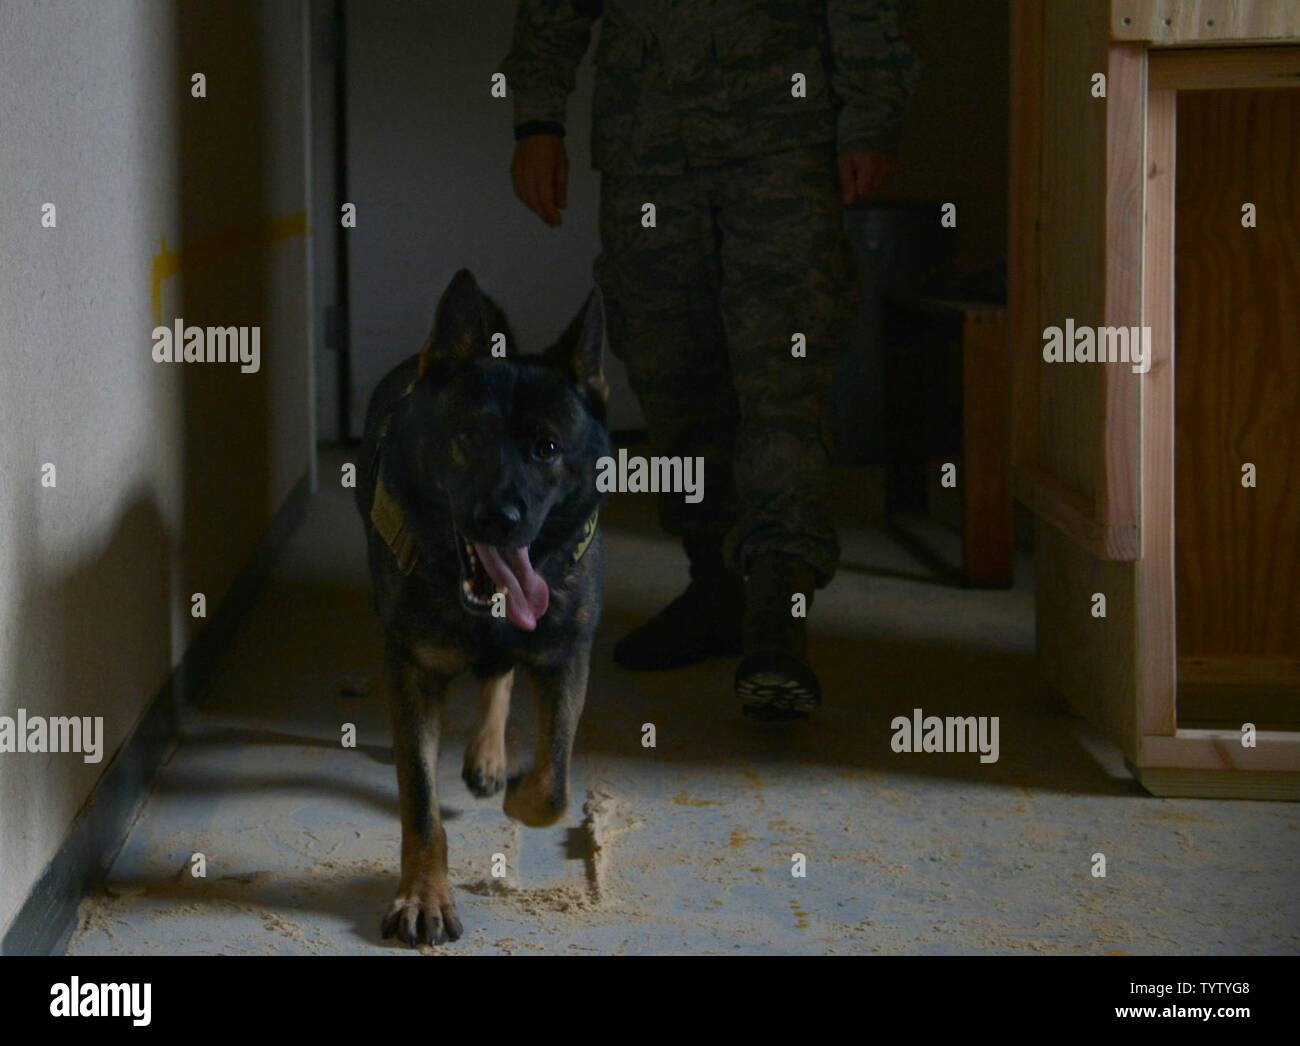 U.S. Air Force Senior Airman Benjamin Howard, 633rd Security Forces Squadron military working dog handler, searches for explosive training aids with Rony, a 633rd SFS MWD, during training at Joint Base Langley-Eustis, Va., Nov. 29, 2016. The purpose of the training was to maintain and strengthen the team’s ability to recognize potential threats. Stock Photo